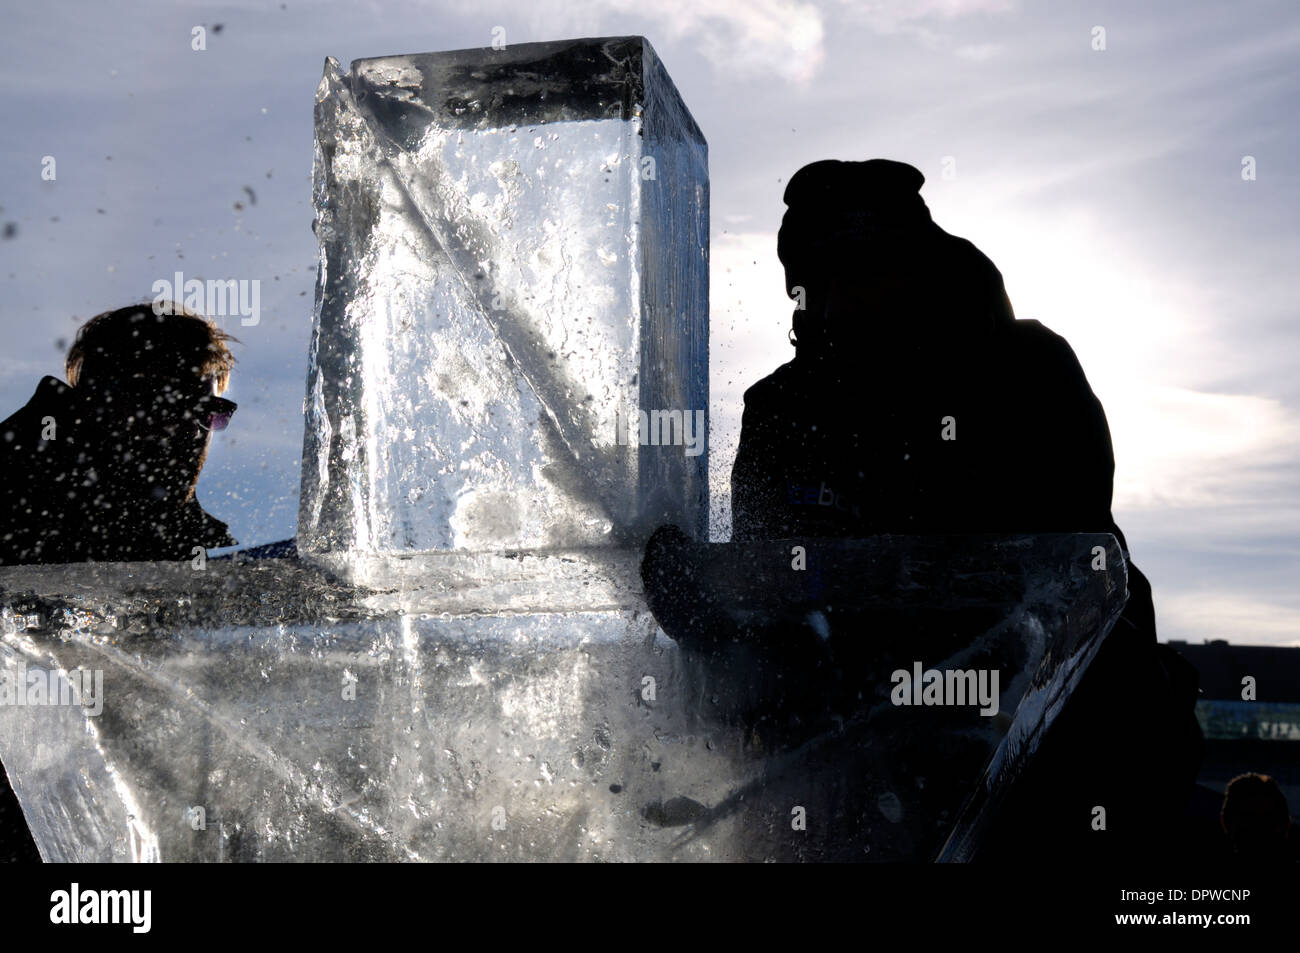 London Ice Sculpting Festival 2014 at Canary Wharf. Stock Photo